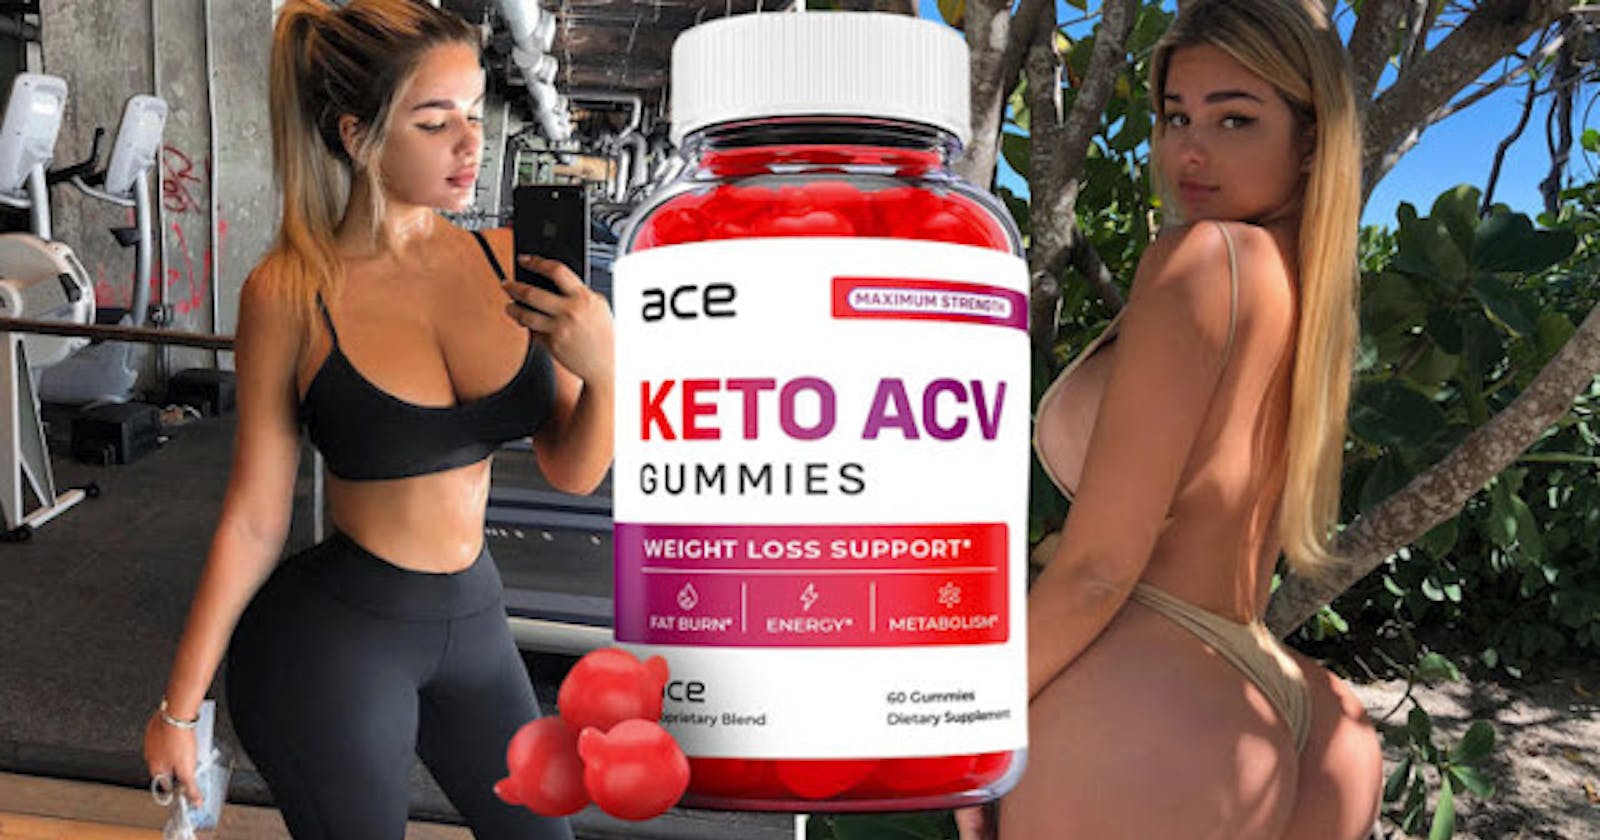 Ace Keto Gummies Lose Weight and Feel Better